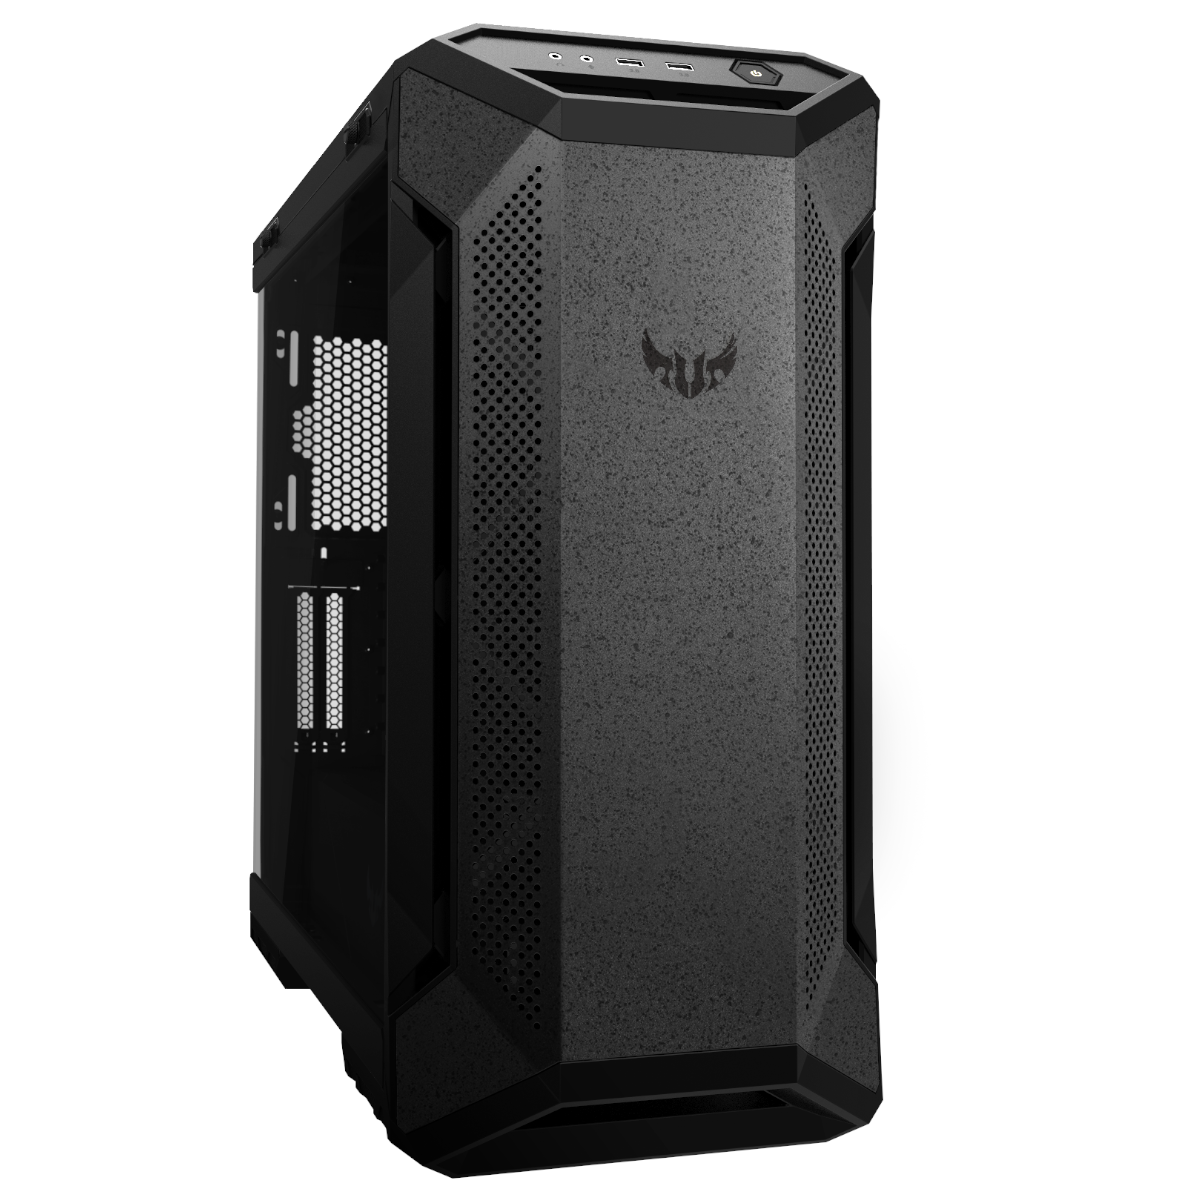 ASUS TUF Gaming GT501VC Midi-Tower Case - Black Tempered Glass